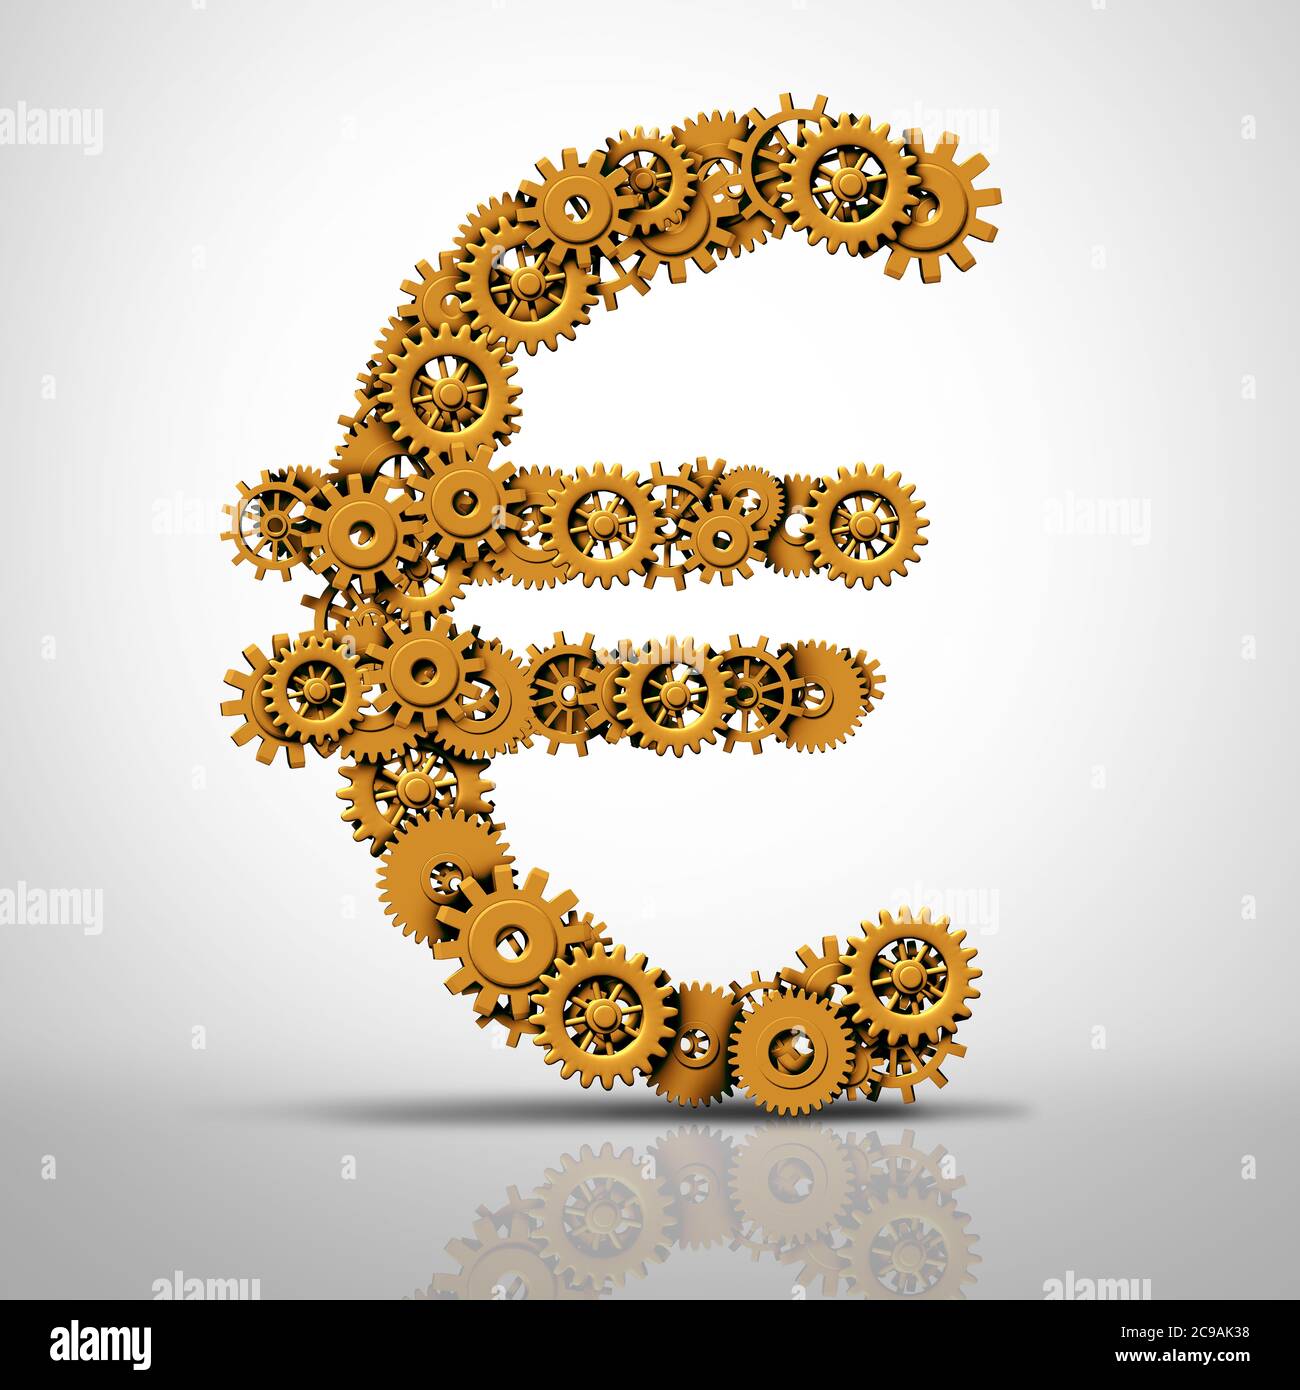 European industry symbol and euro money icon as a group of gears and cogs as an economic or economy icon for business in Germany or France and Italy. Stock Photo